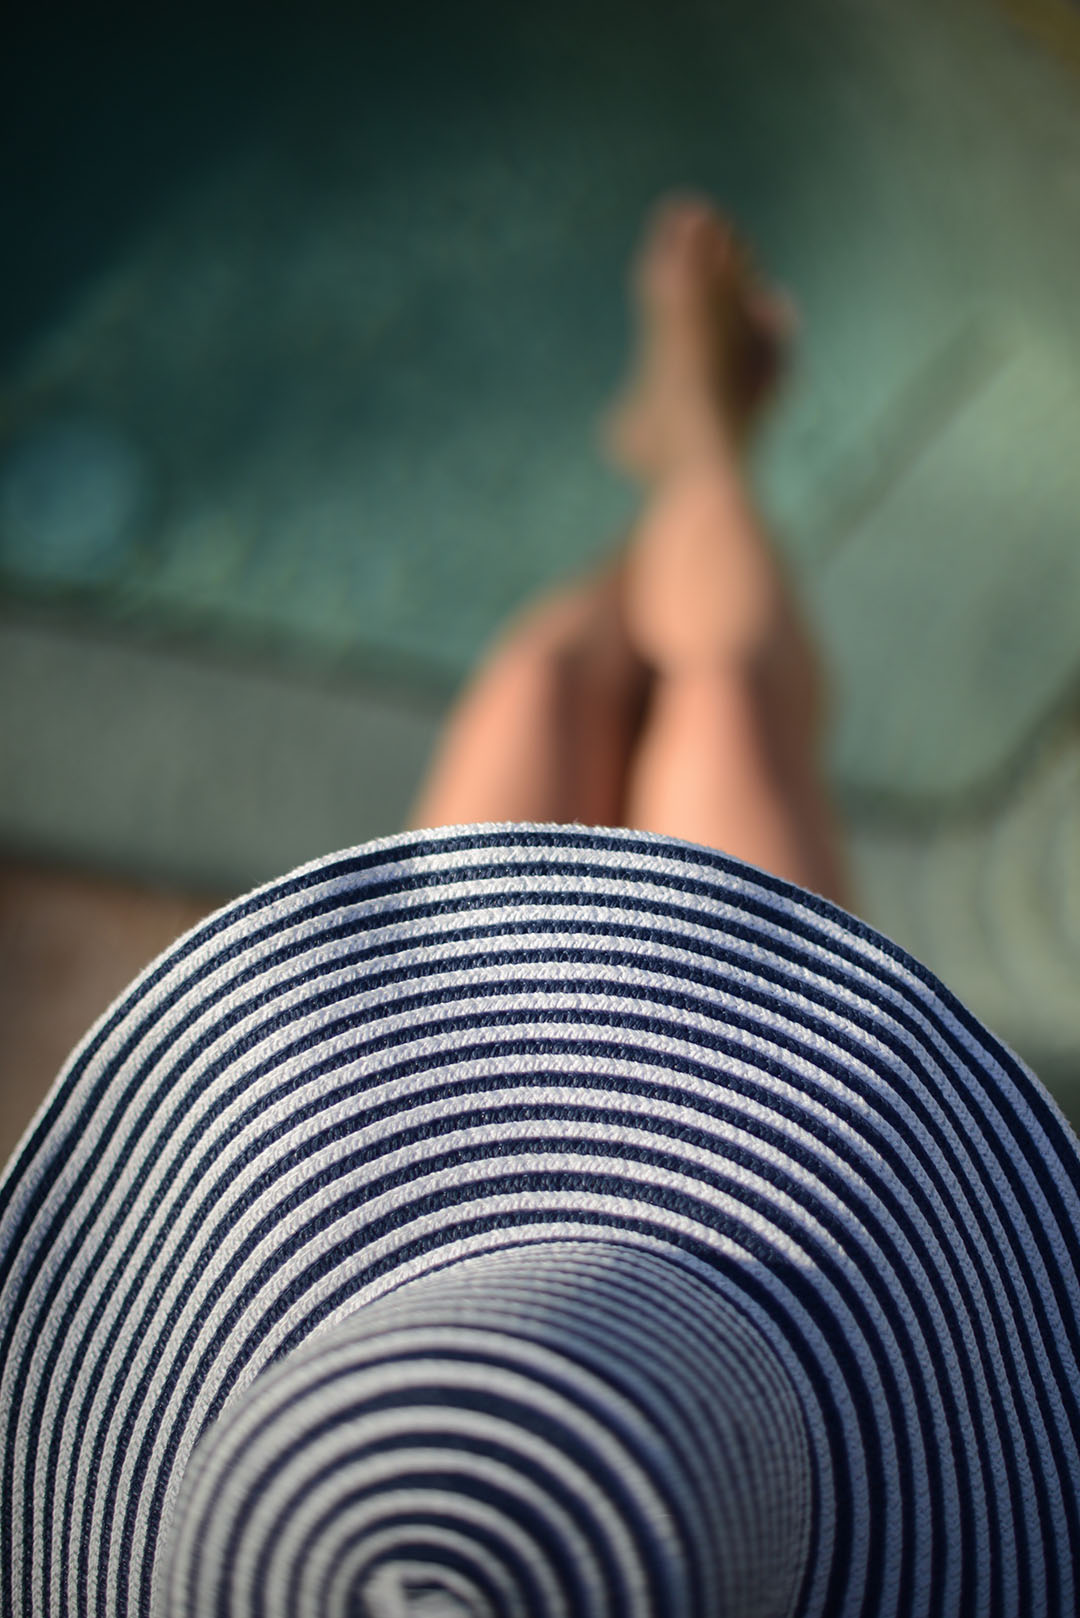 magid hat by the pool worn by emma rickwood photographed by sara delaney